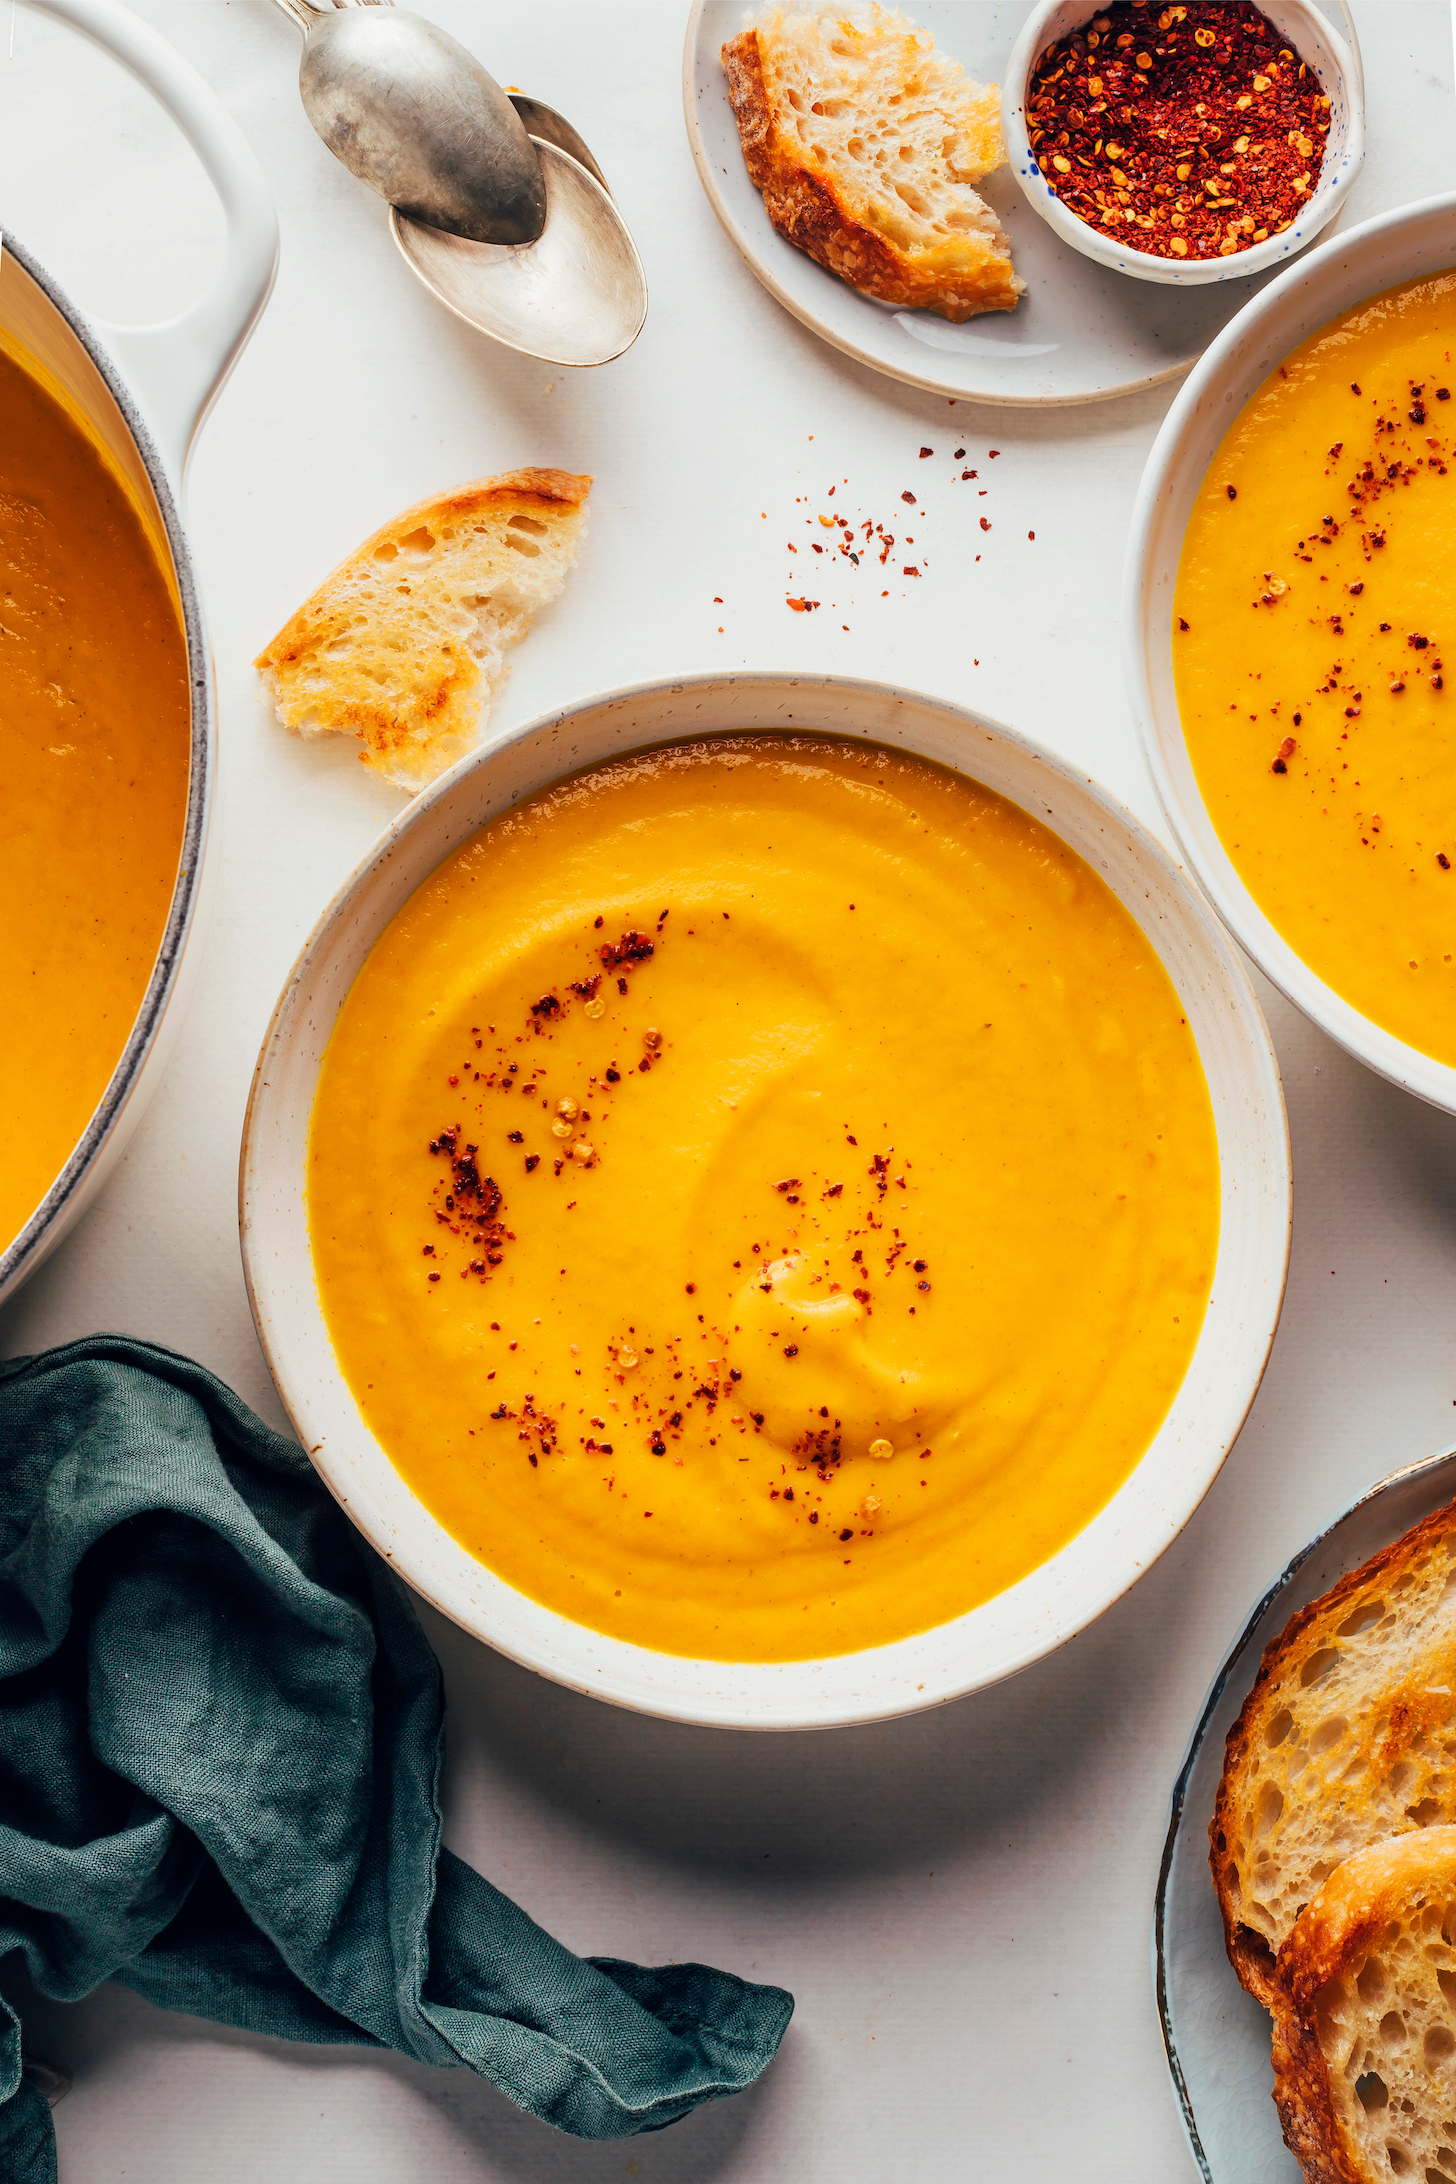 Large pot and bowls of creamy carrot soup next to slices of toasted bread